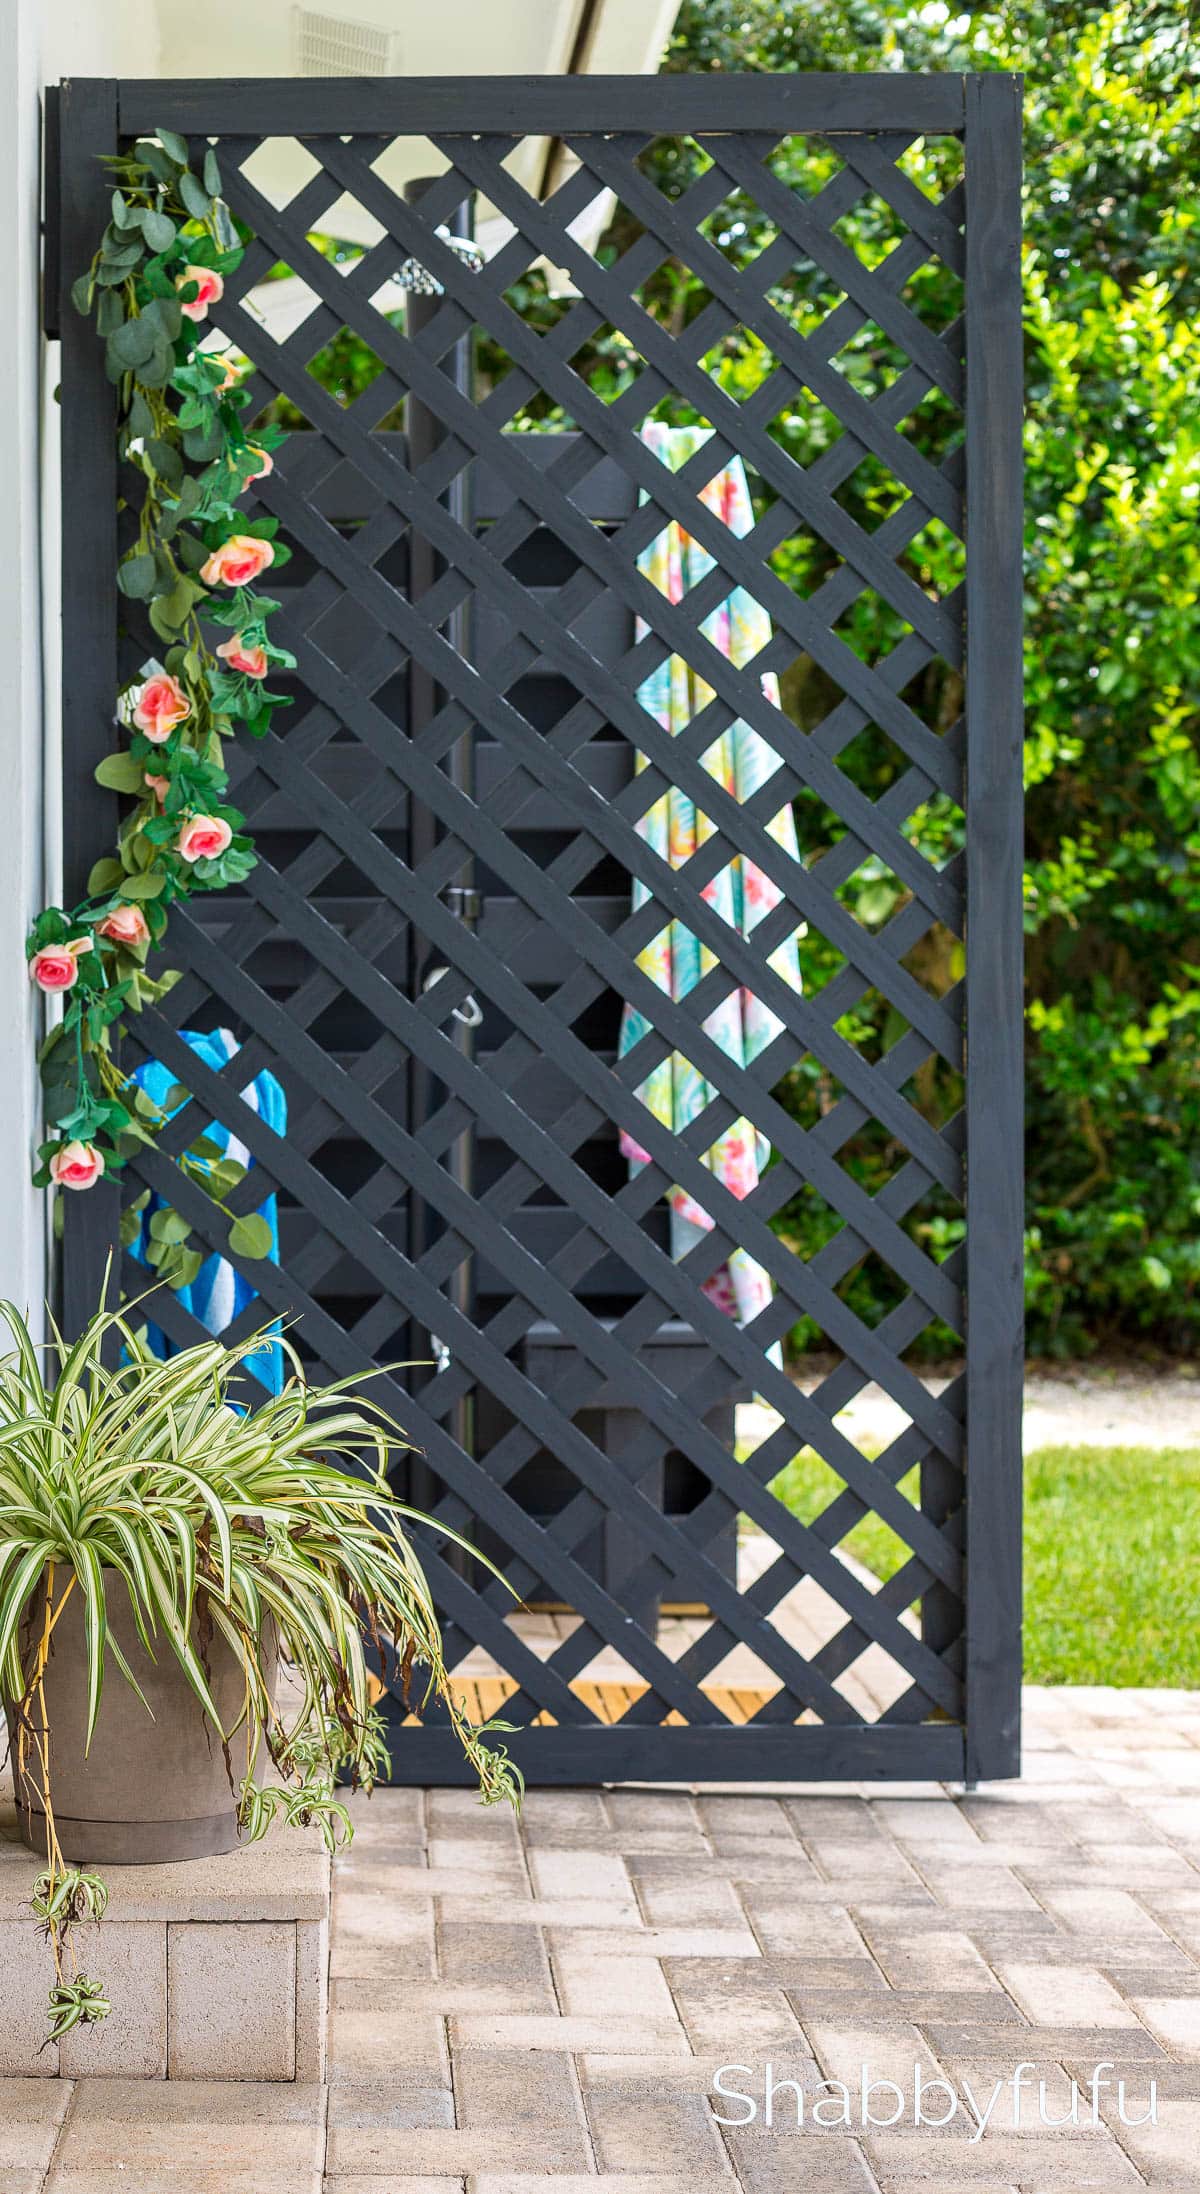 How To Build A Lattice Screen – Easy DIY Project